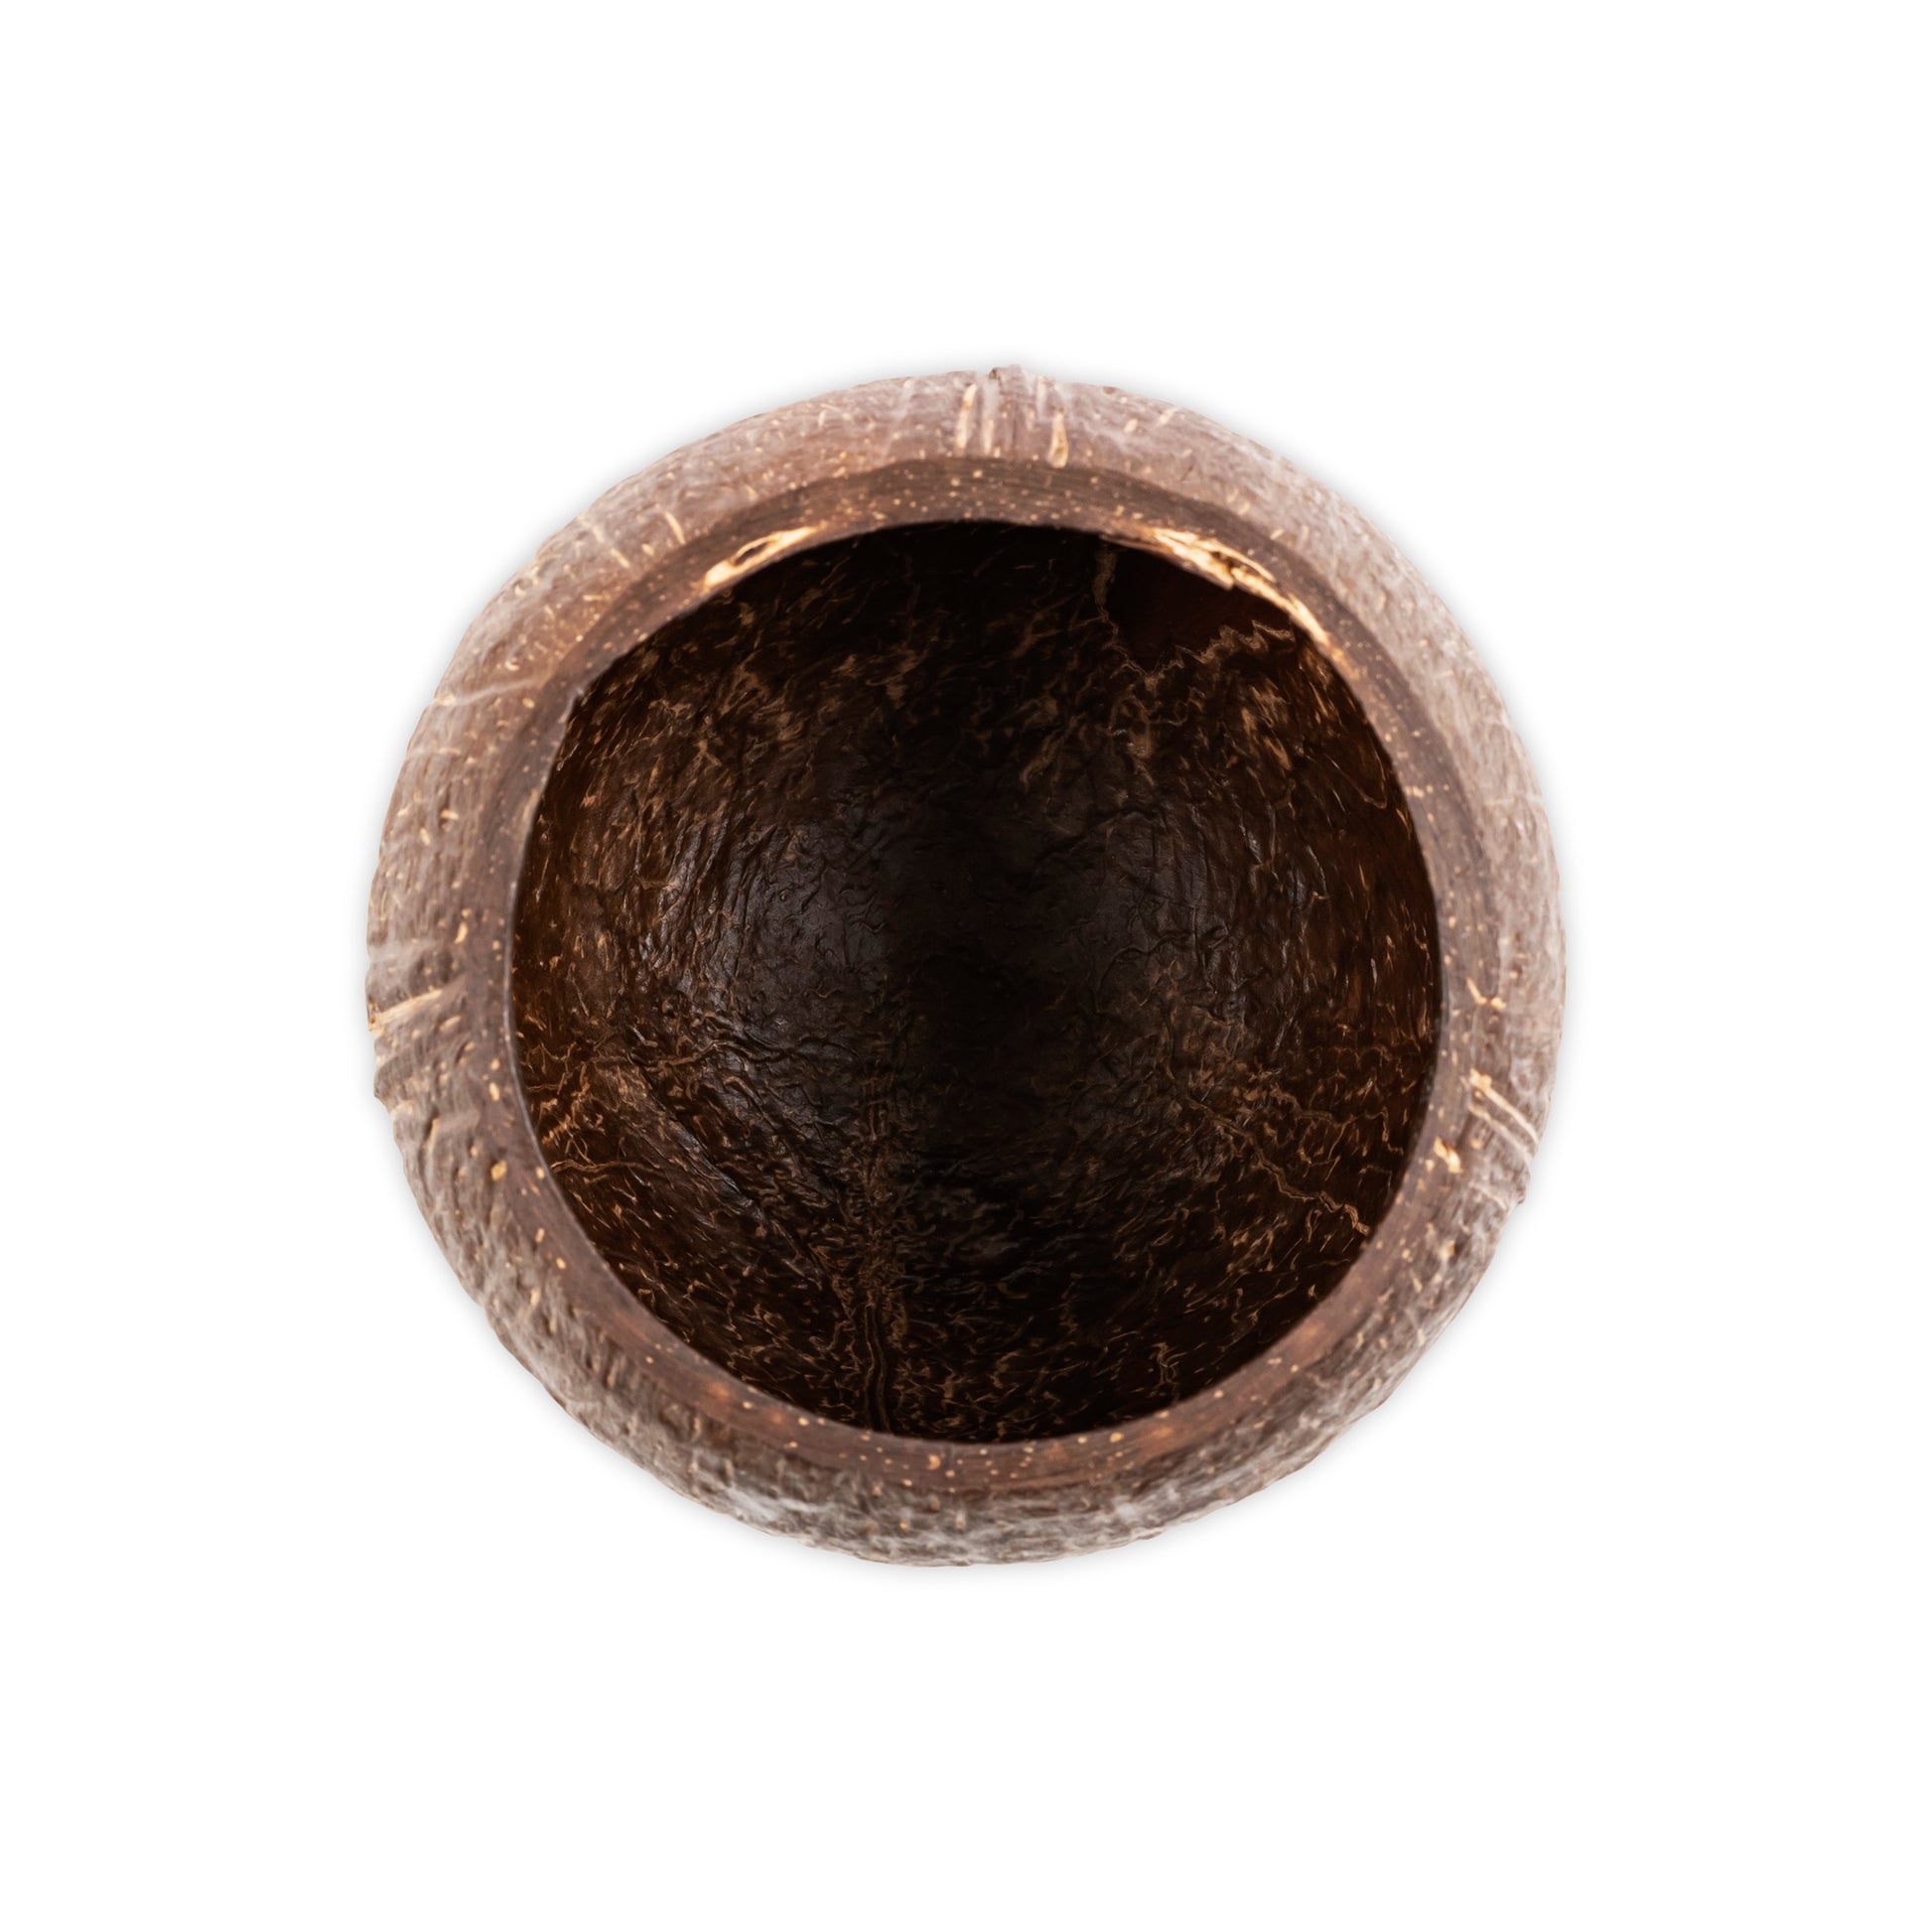 inside of coconut cup